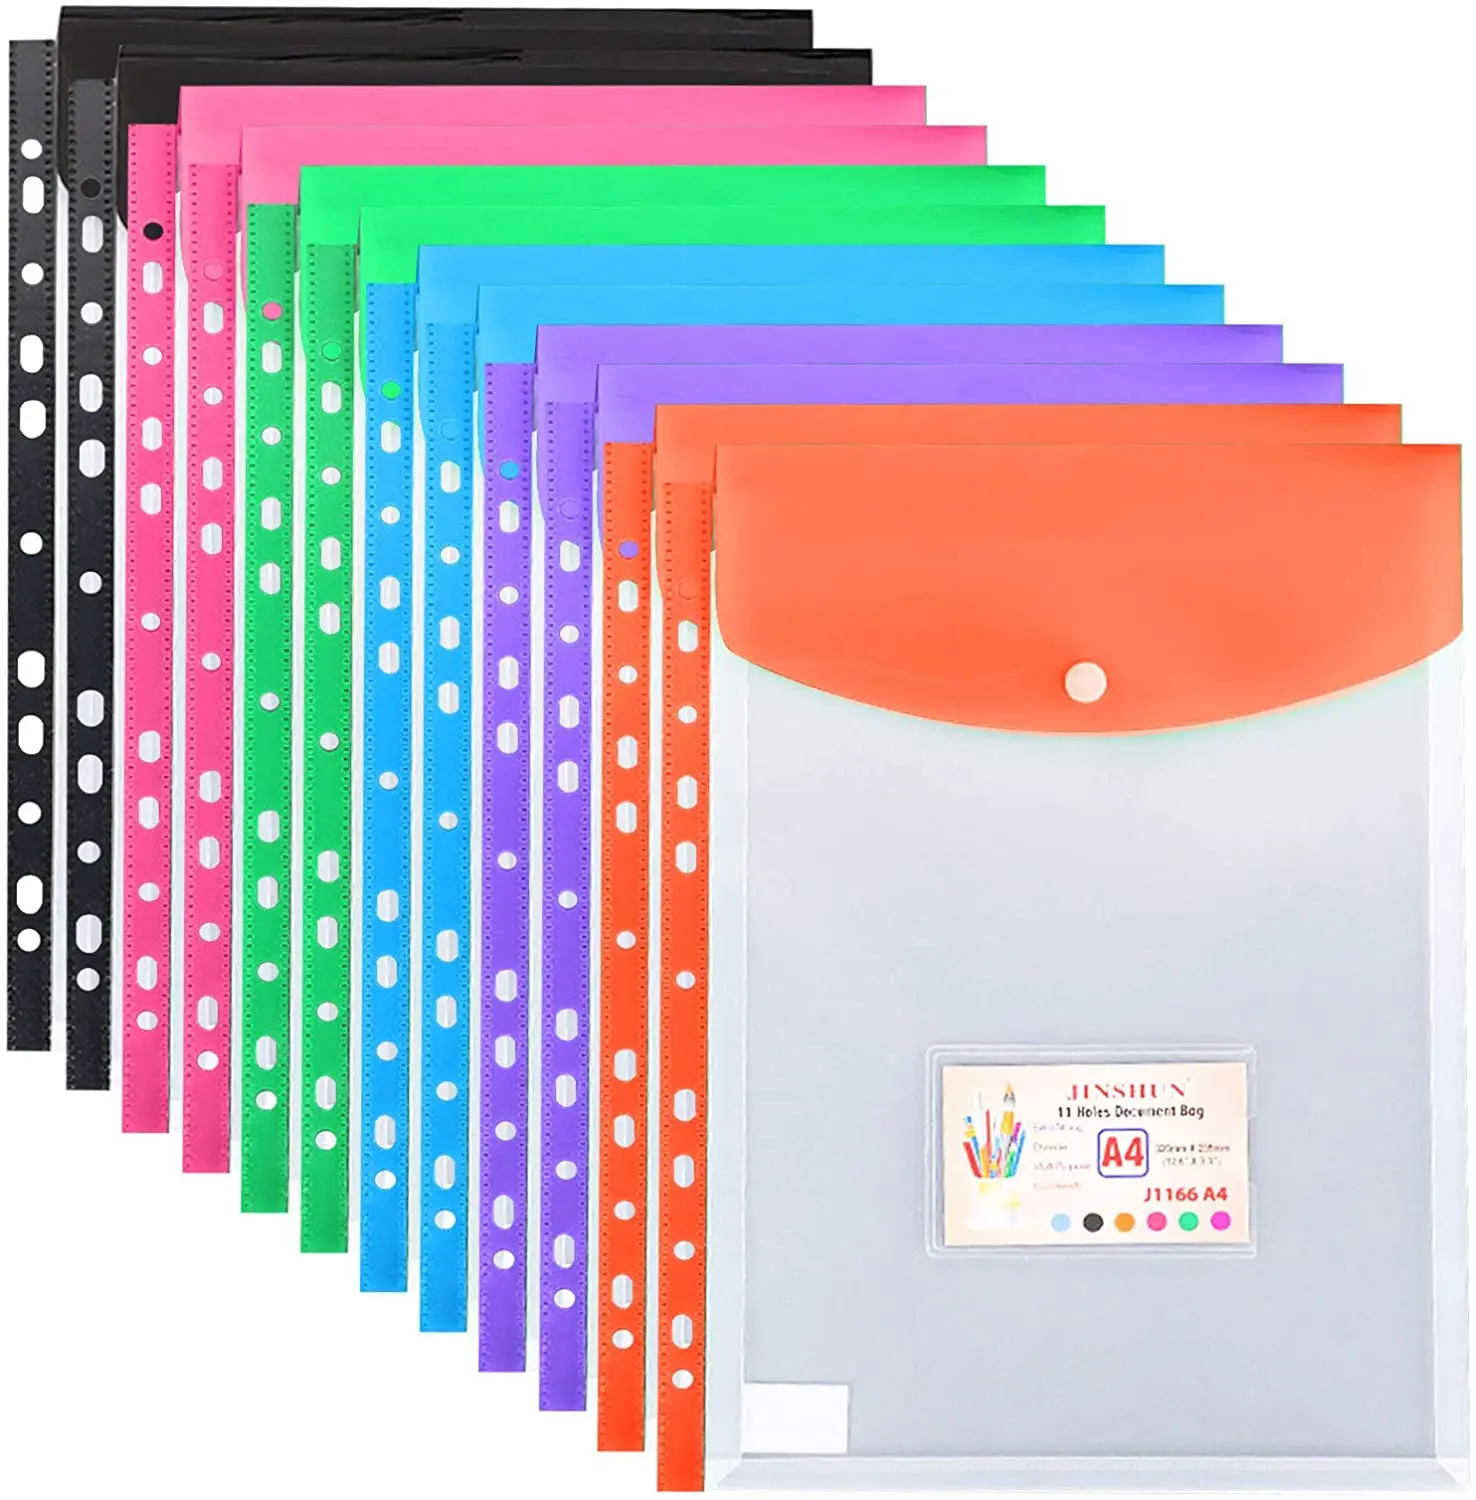 A4 Clear Plastic Punched Pockets with Button Closure for Home Office and School Files 11 Hole Binder Envelopes Folders Organizer